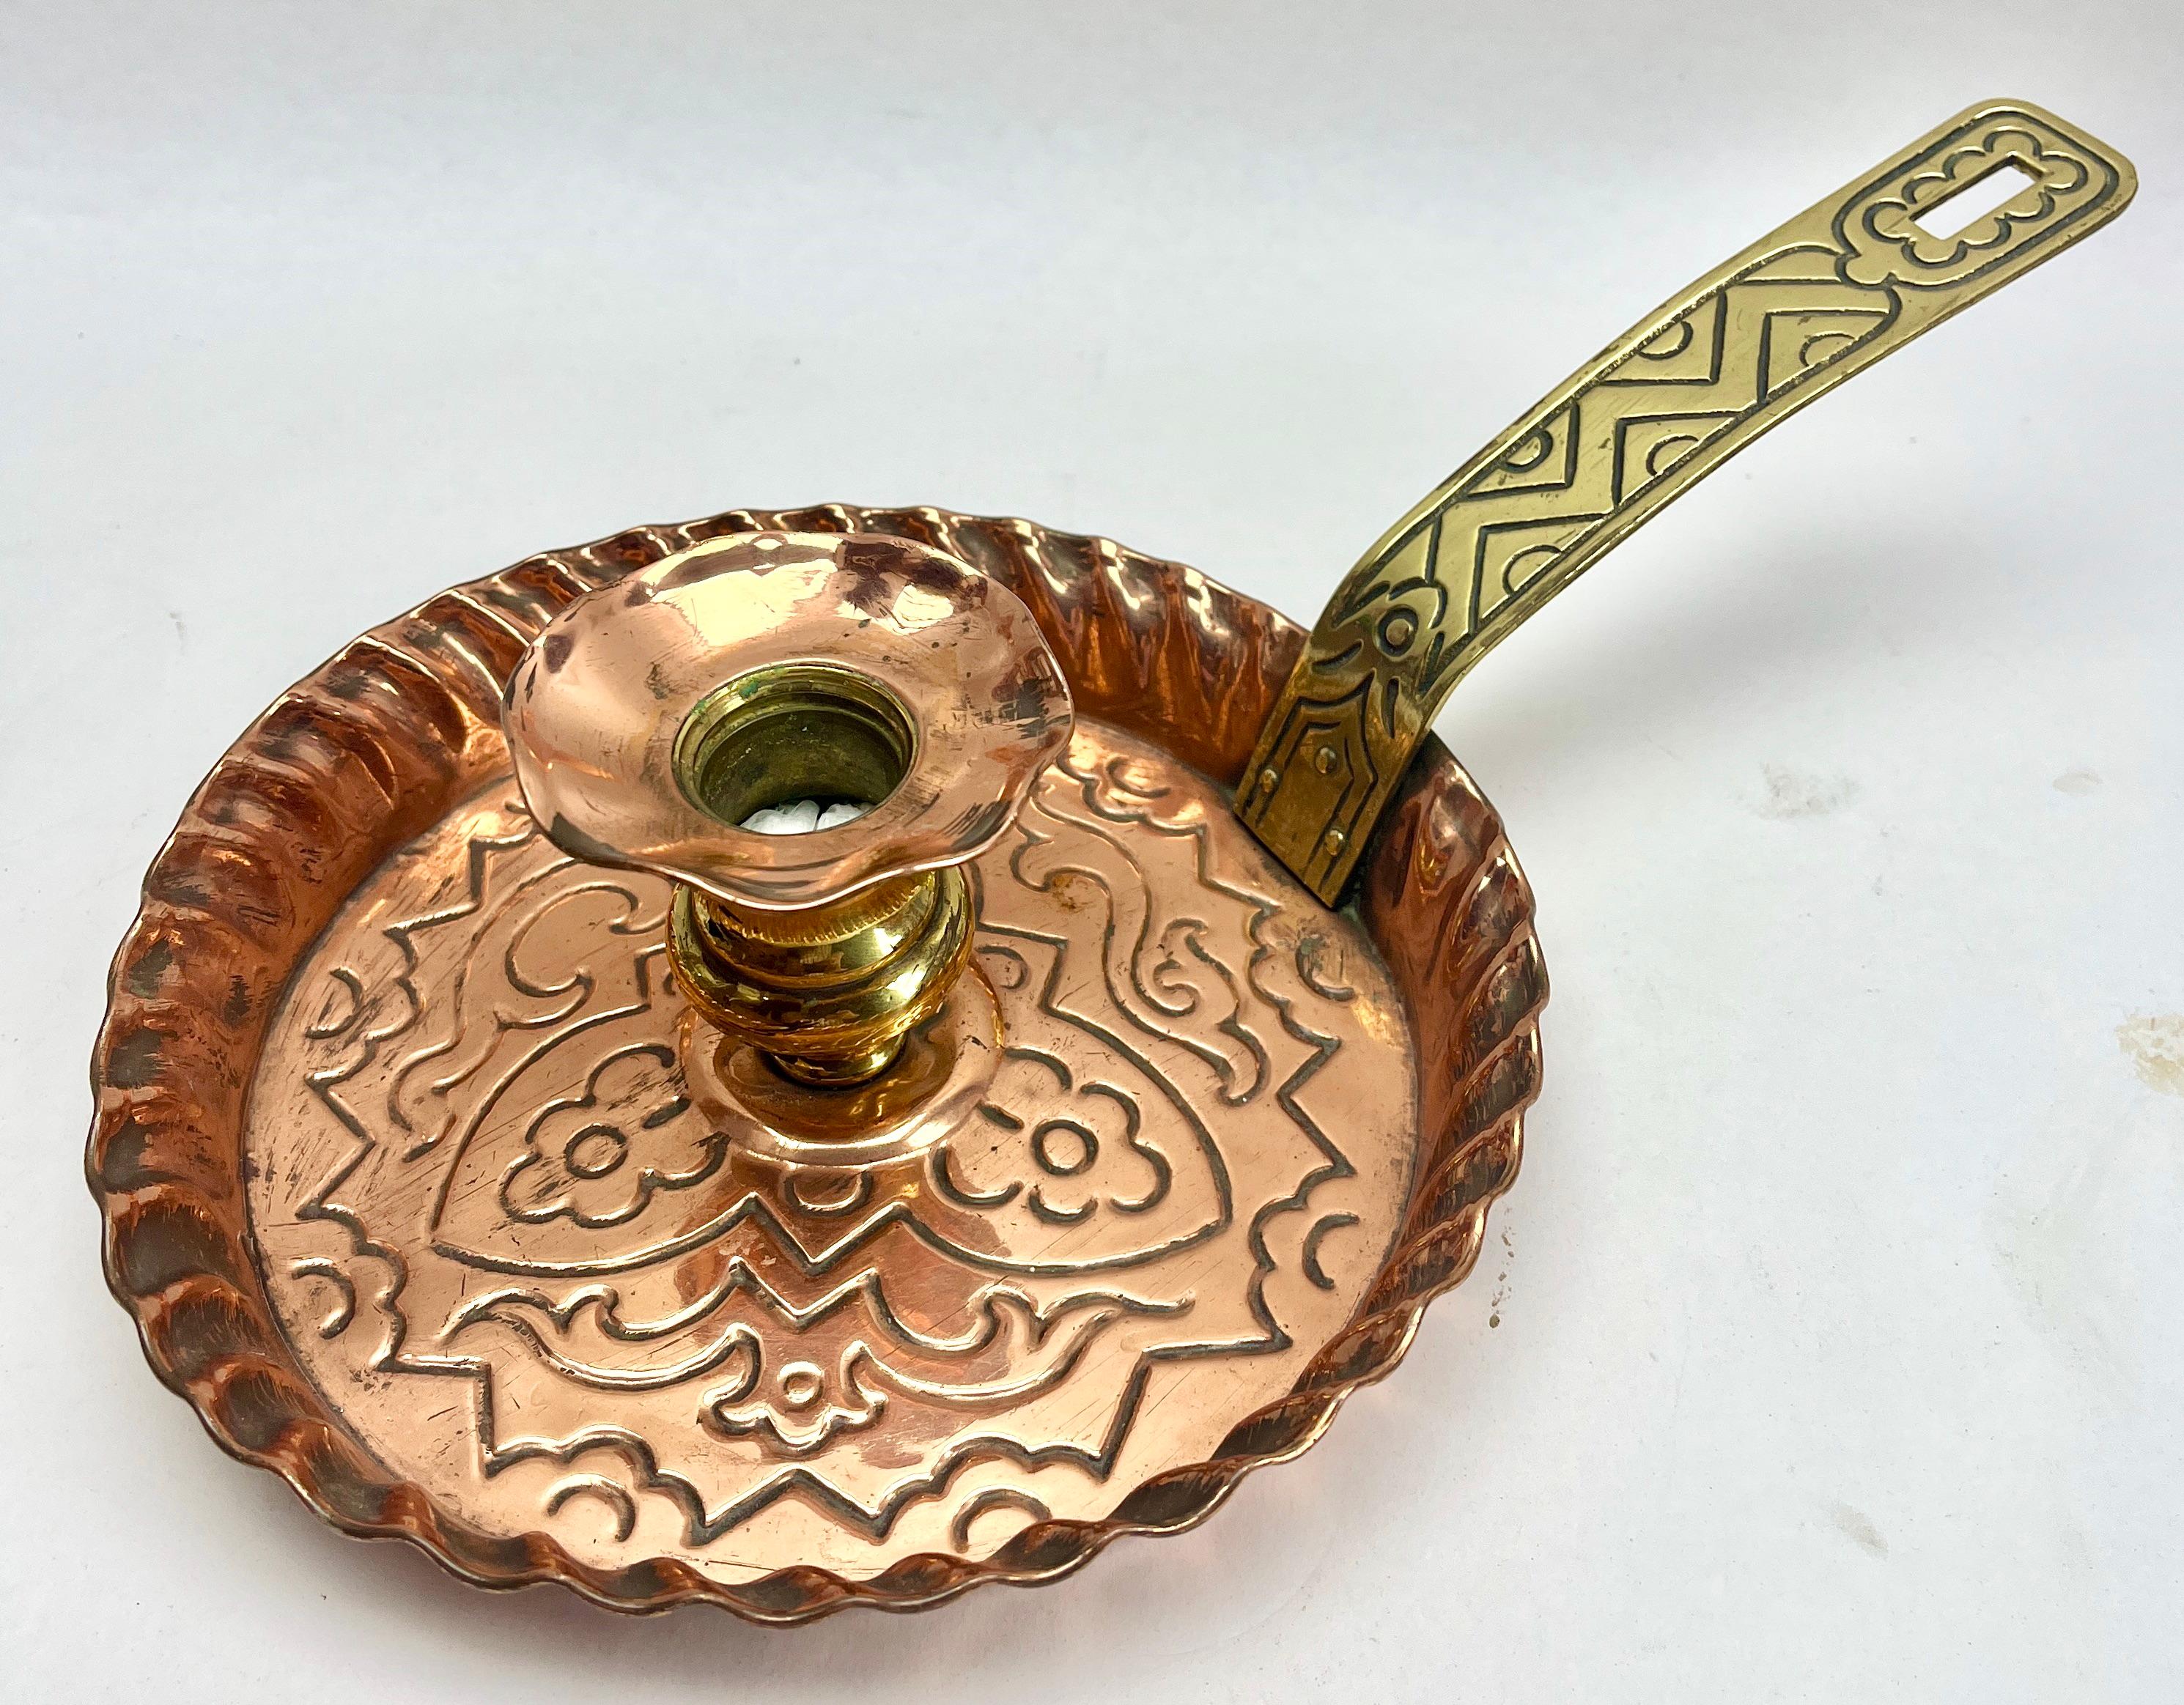 Arts and Crafts copper and brass candlestick Germany. 
The base, handle and drip tray are constructed of copper and the upright candle holder is in brass. with a distintive concave curved handle that slots into the drip tray. 

The piece is in Good